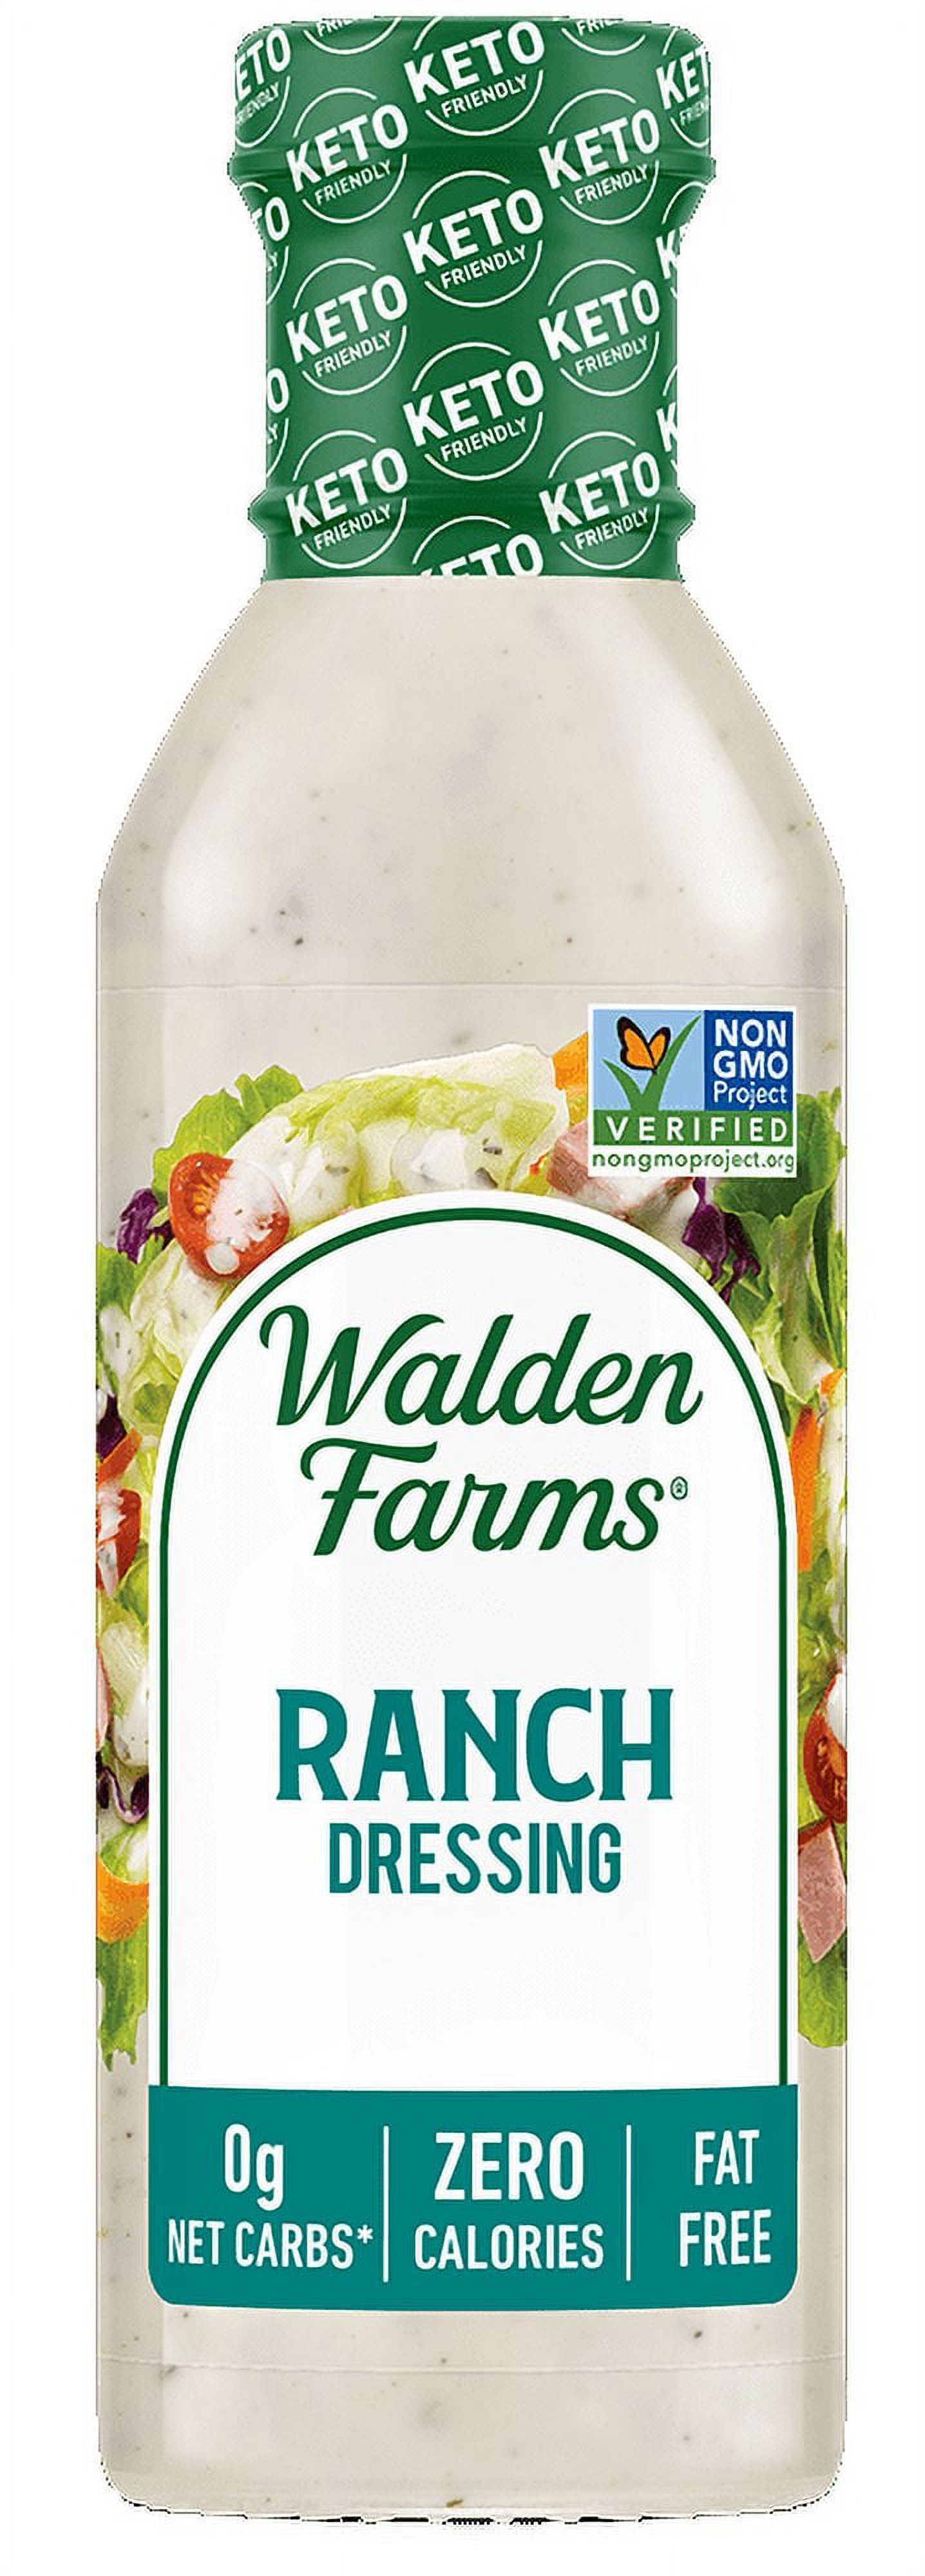 Walden Farms Ranch Dressing, 12 oz. Bottle, Fresh and Delicious Salad Topping, Sugar Free 0g Net Carbs Condiment, Cool and Tangy - image 1 of 7